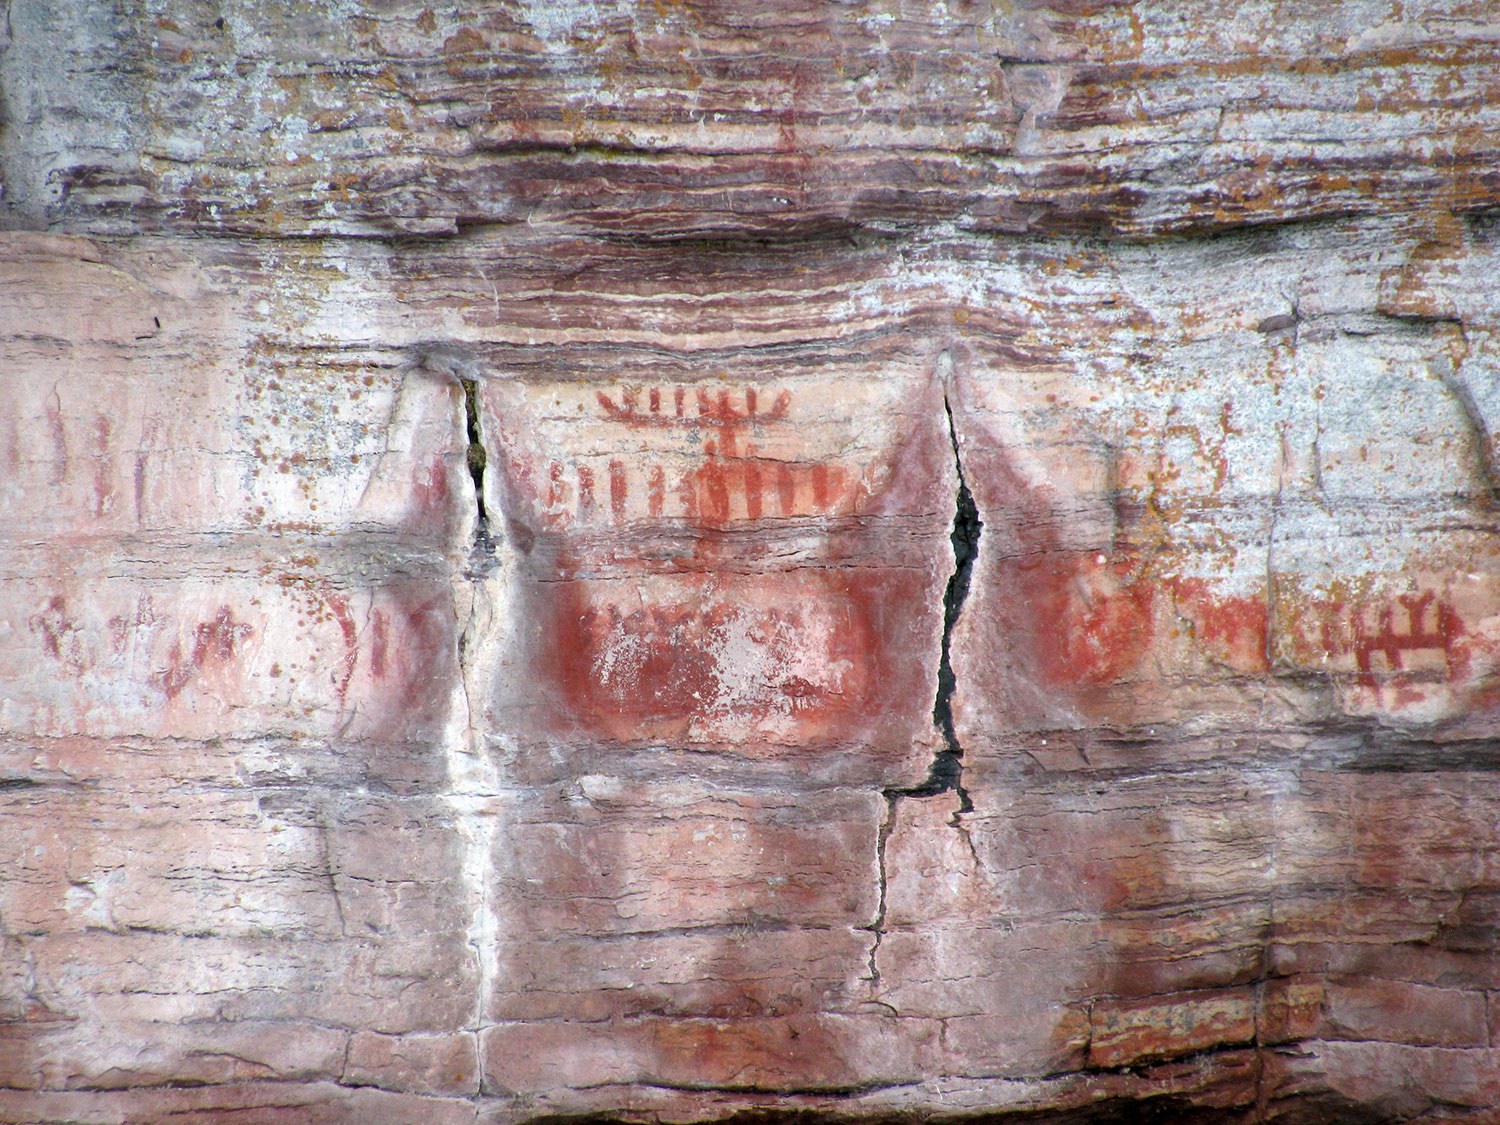 The Maymaygwayshi, or water sprite, painted on a cliff near the mouth of the Nipigon River